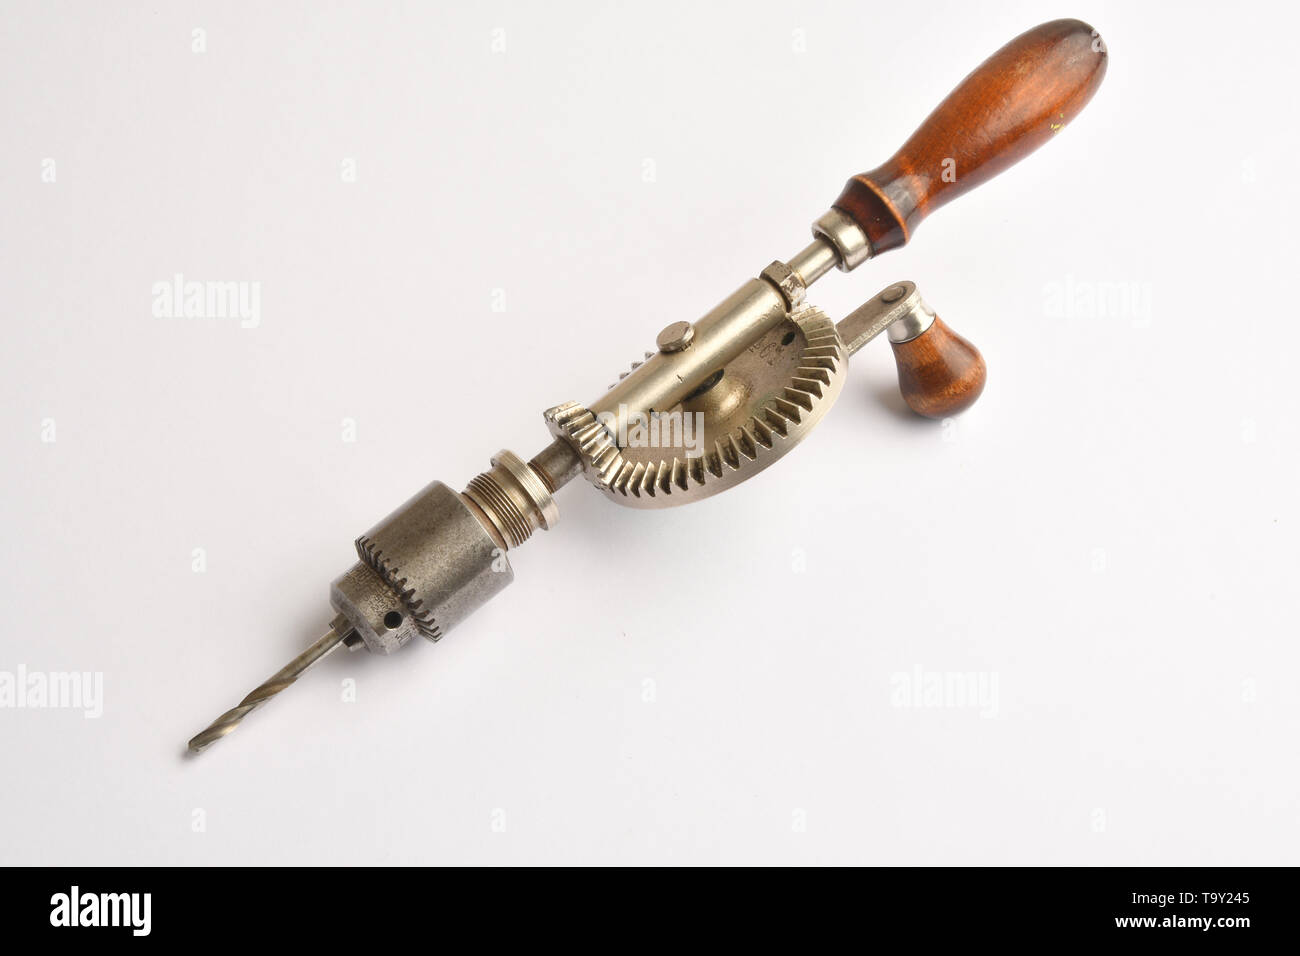 A hand operated geared drill fitted with a collet chuck holding a metal cutting drill bit. Stock Photo